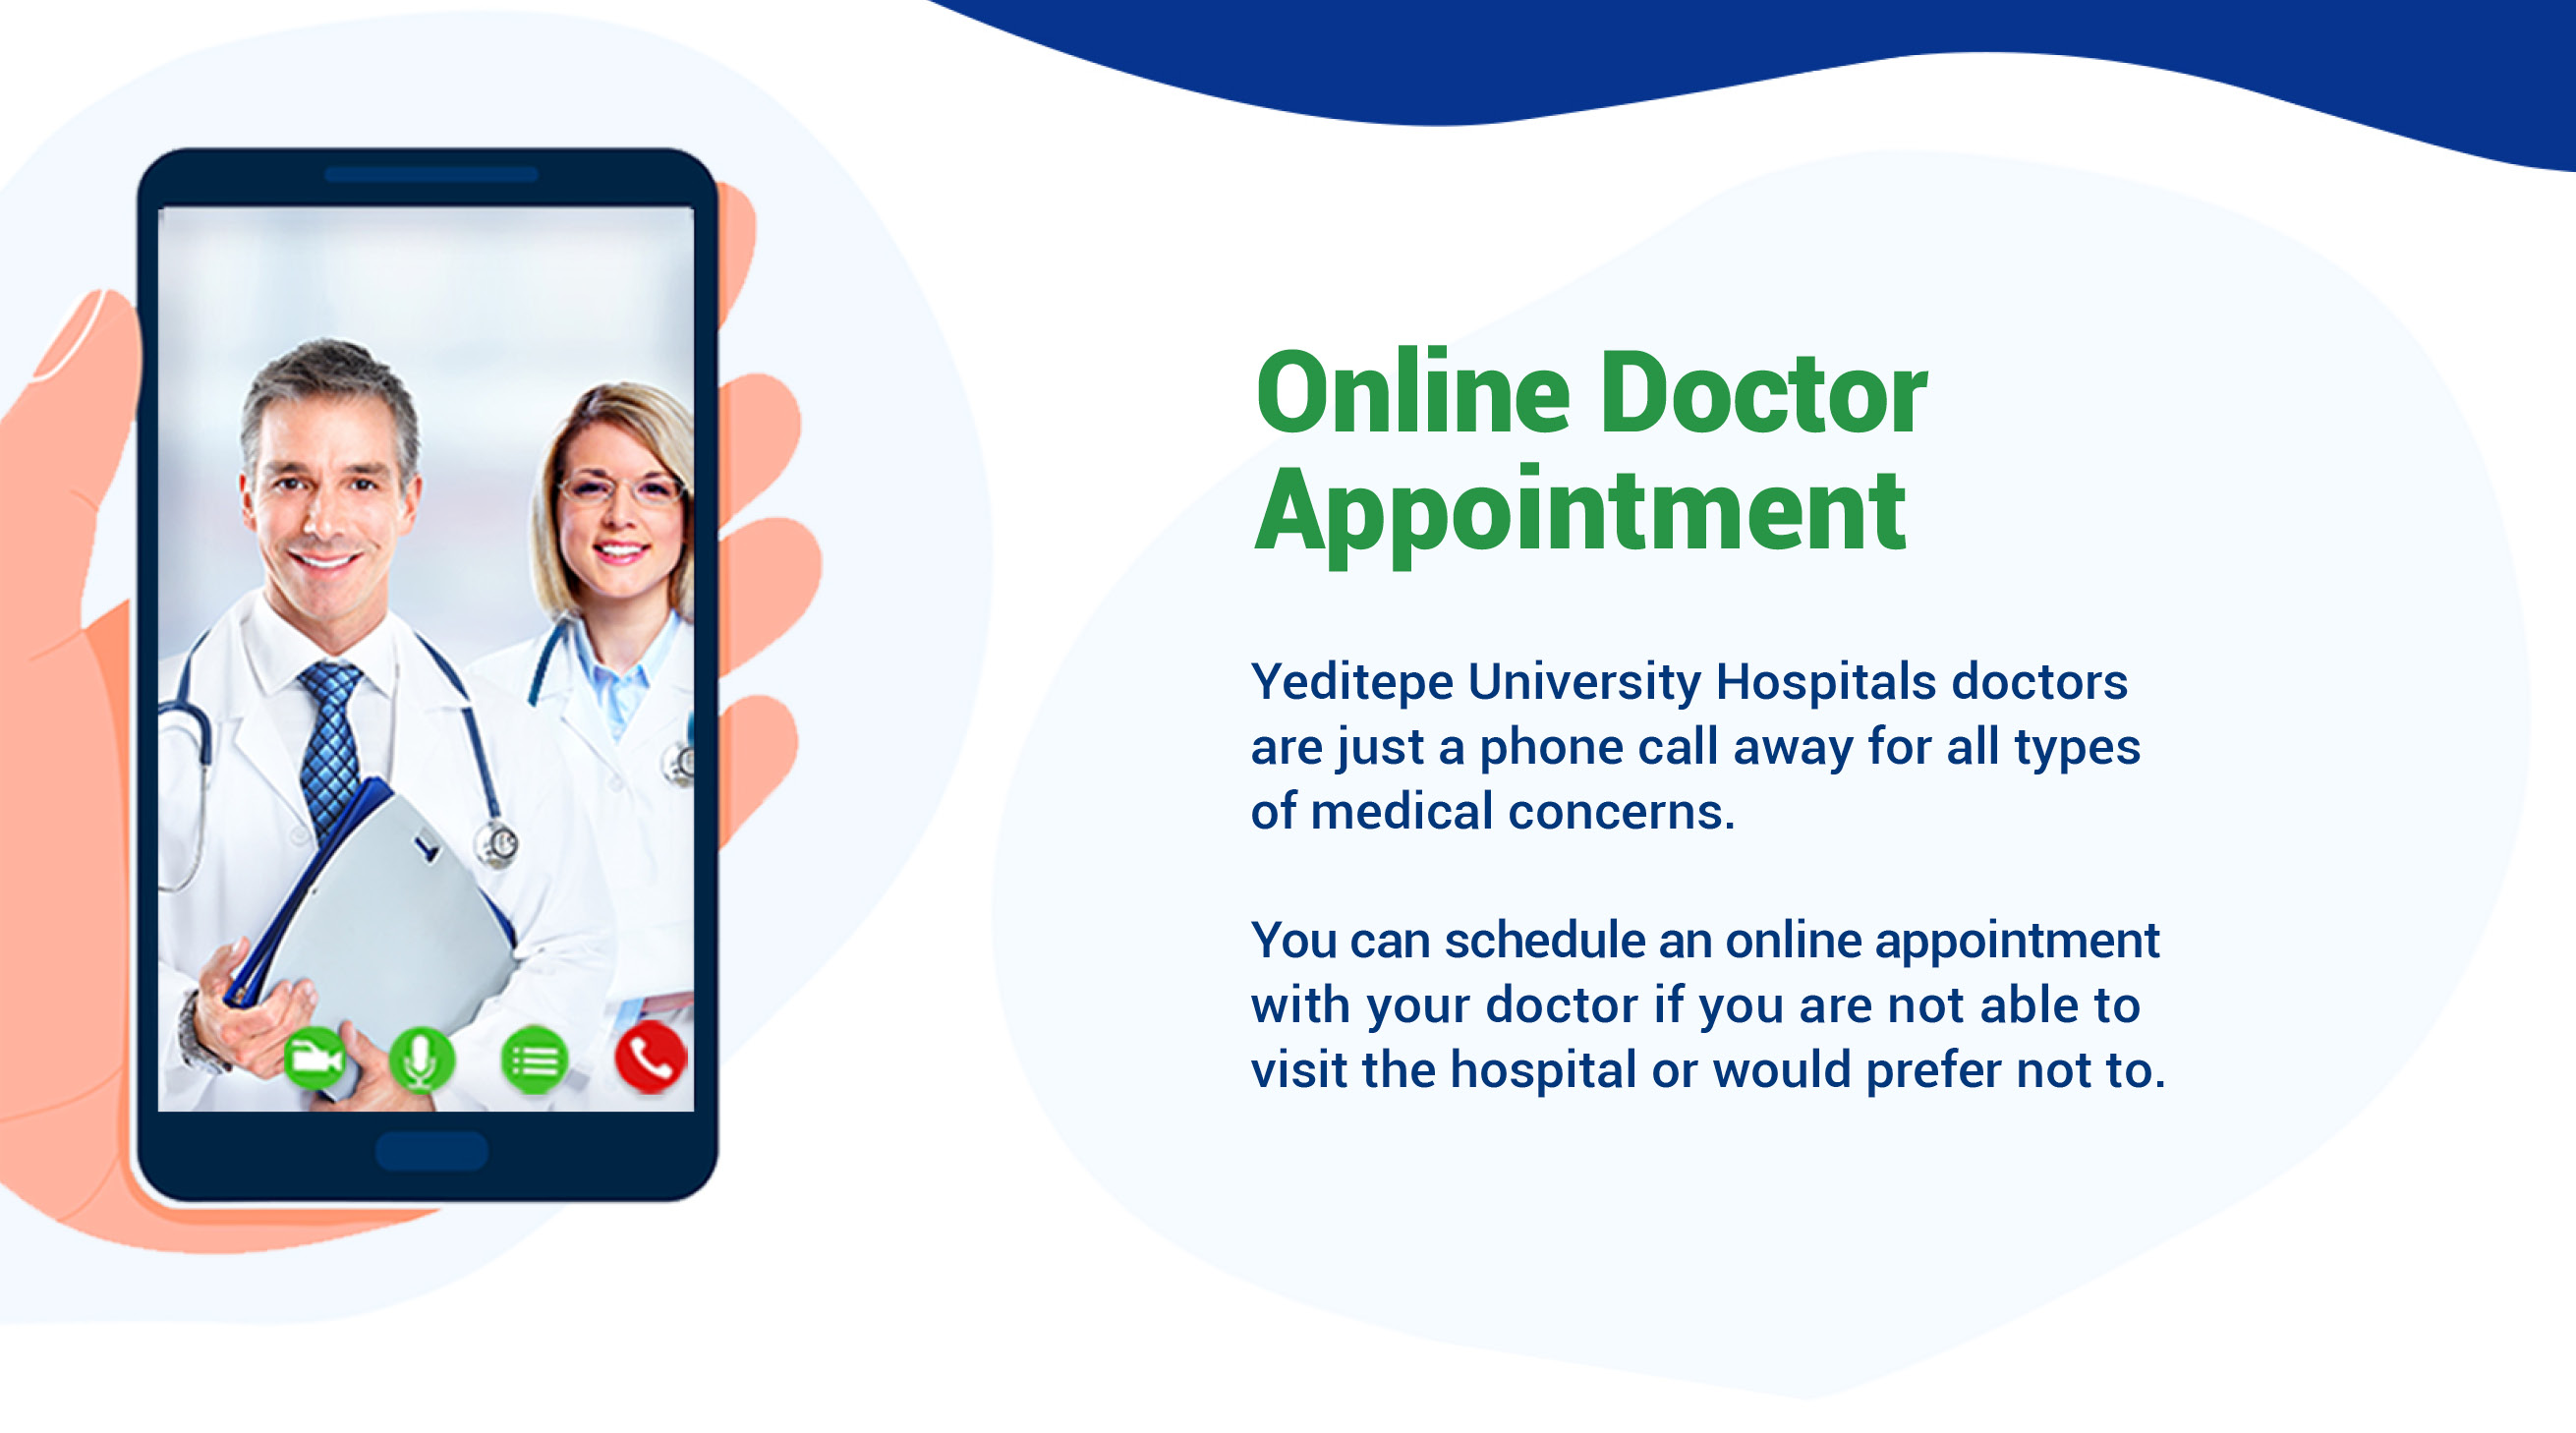 Online Doctor Appointment